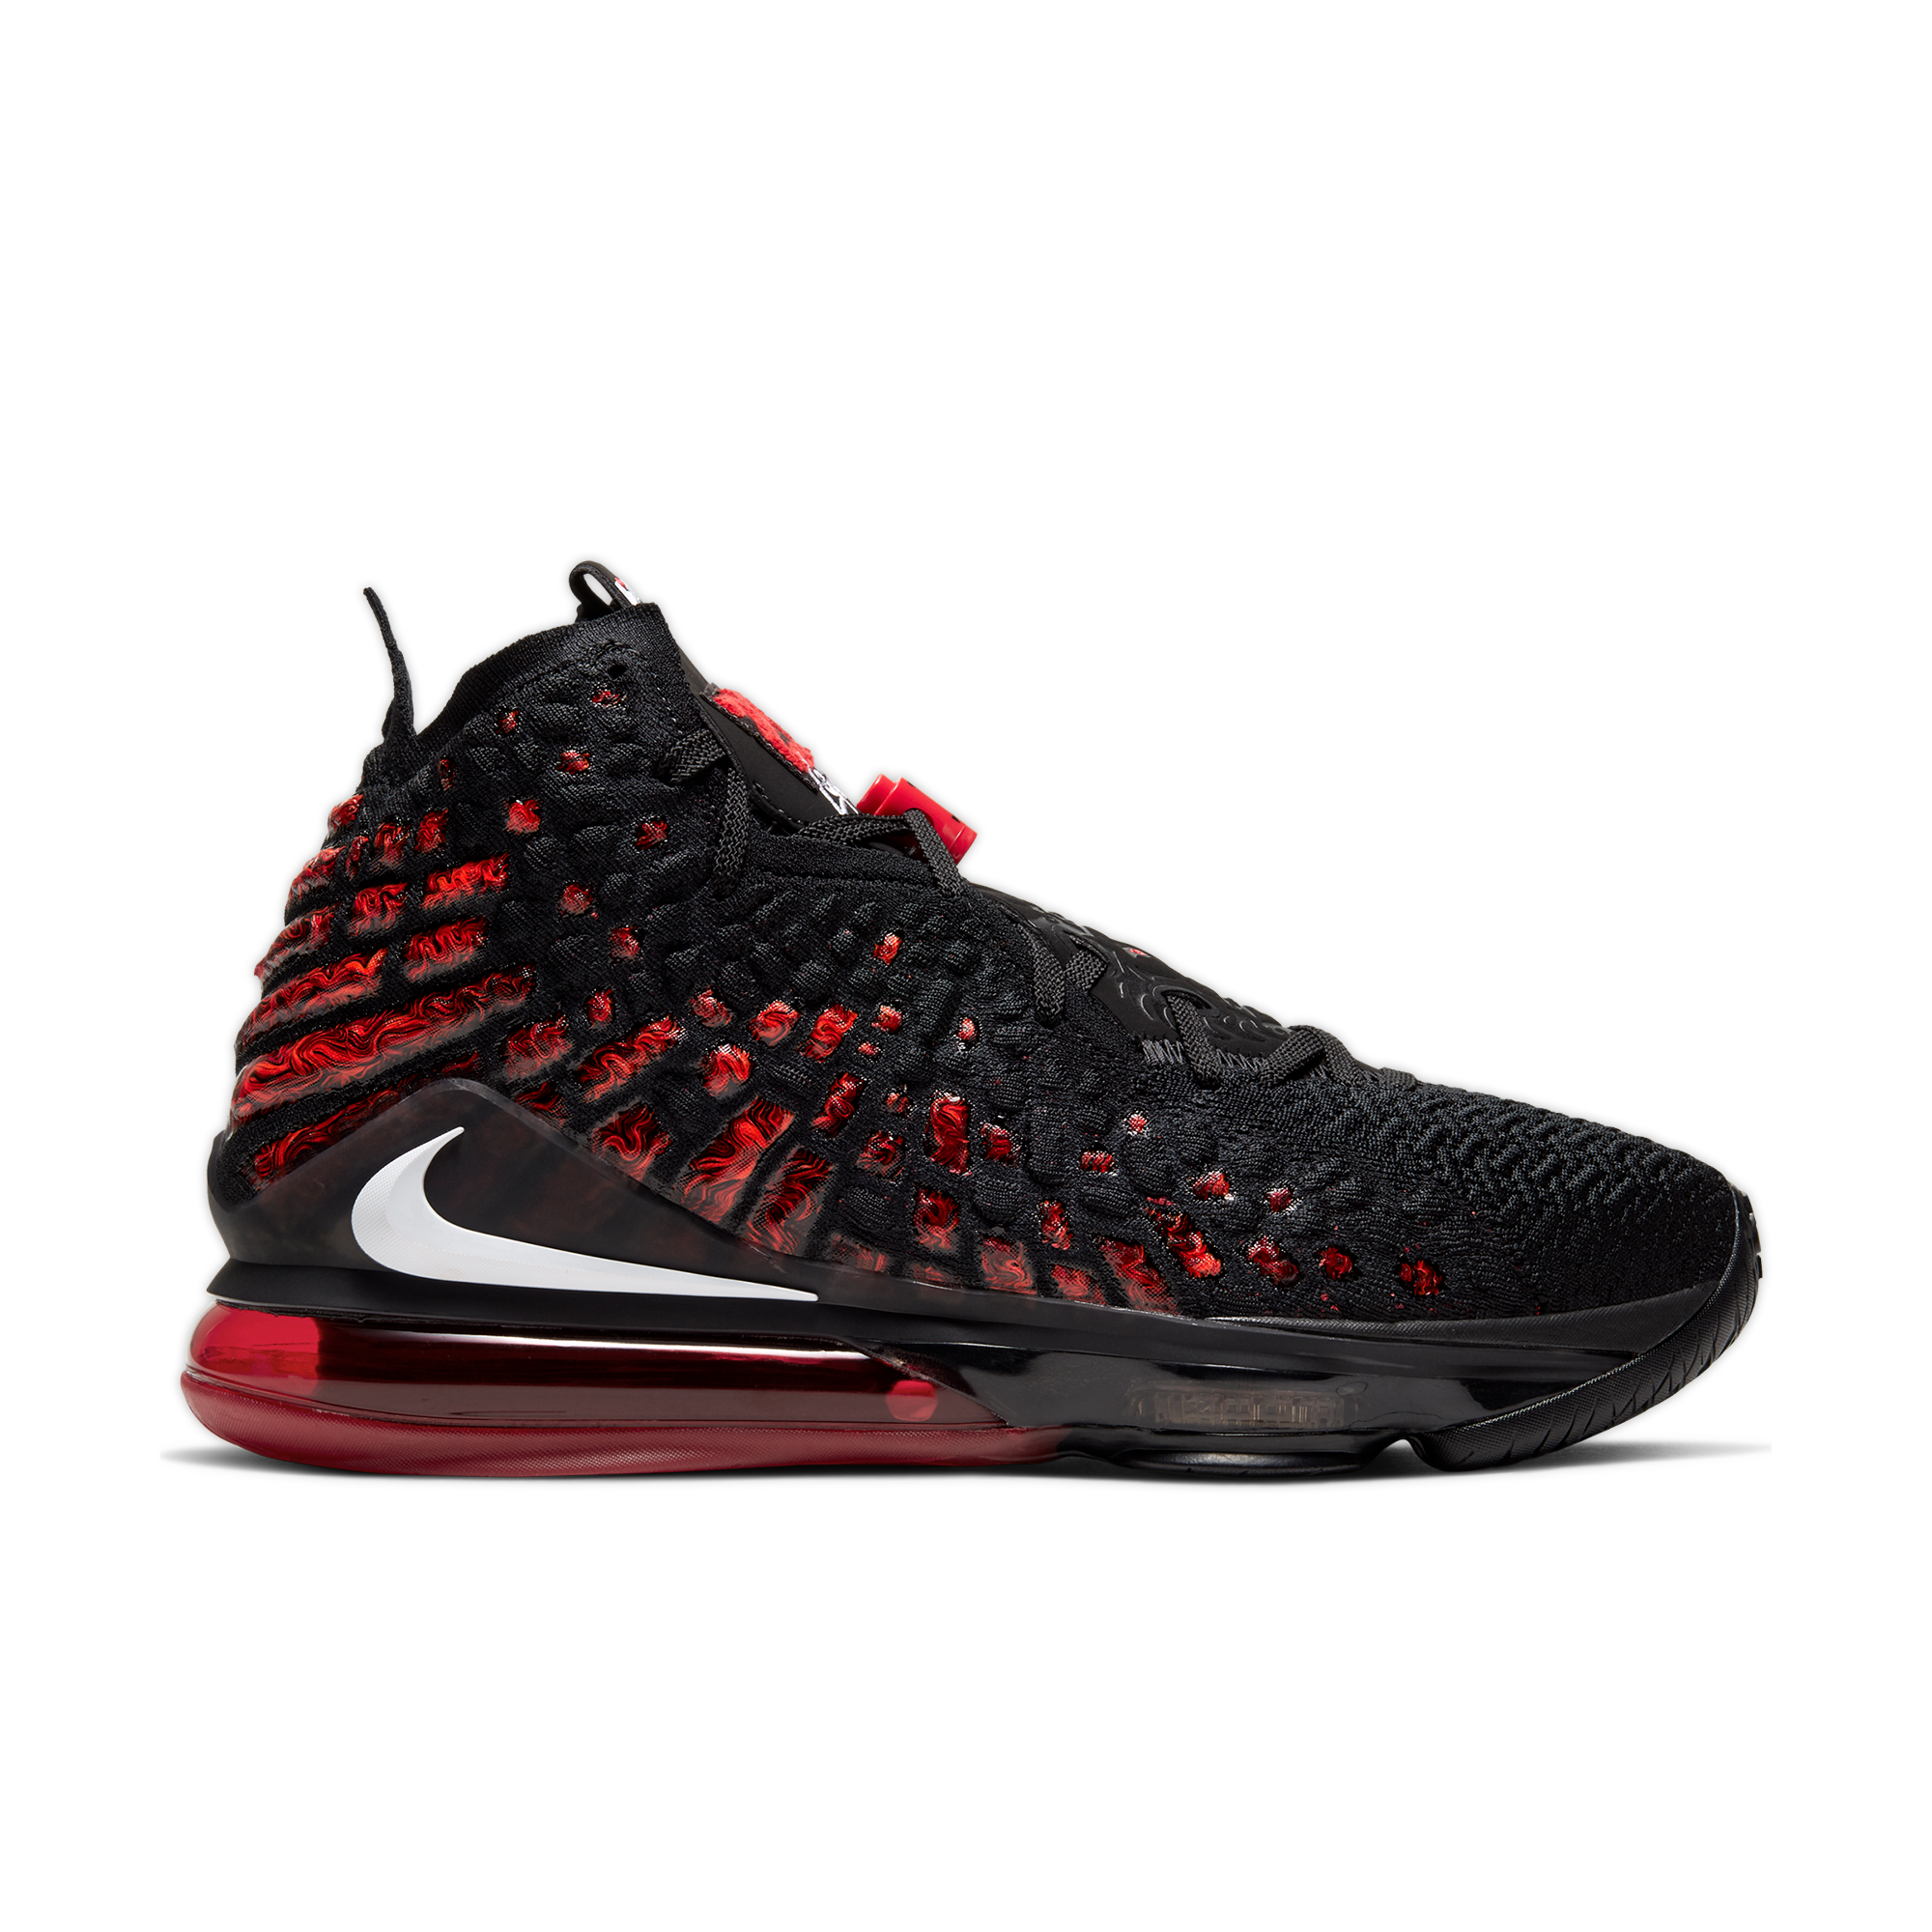 lebron james red nike shoes